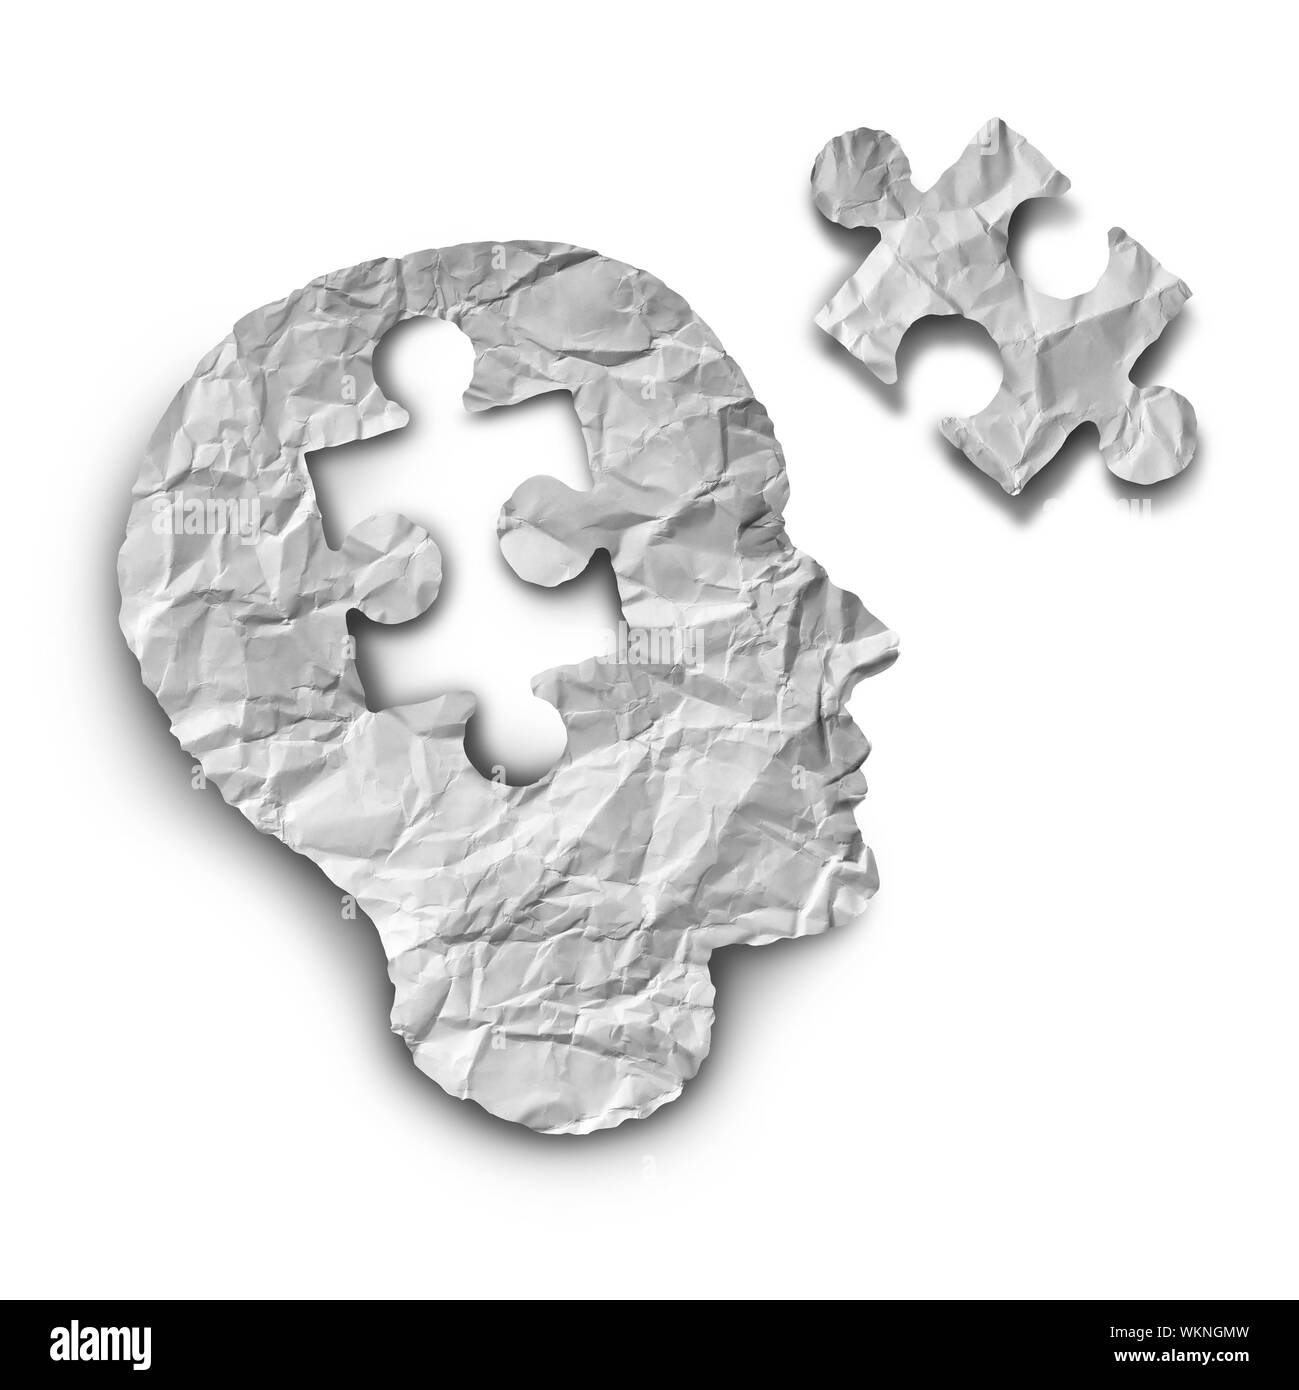 Puzzle mind and idea concept as a paper person with a jigsaw piece missing in a 3D illustration style. Stock Photo